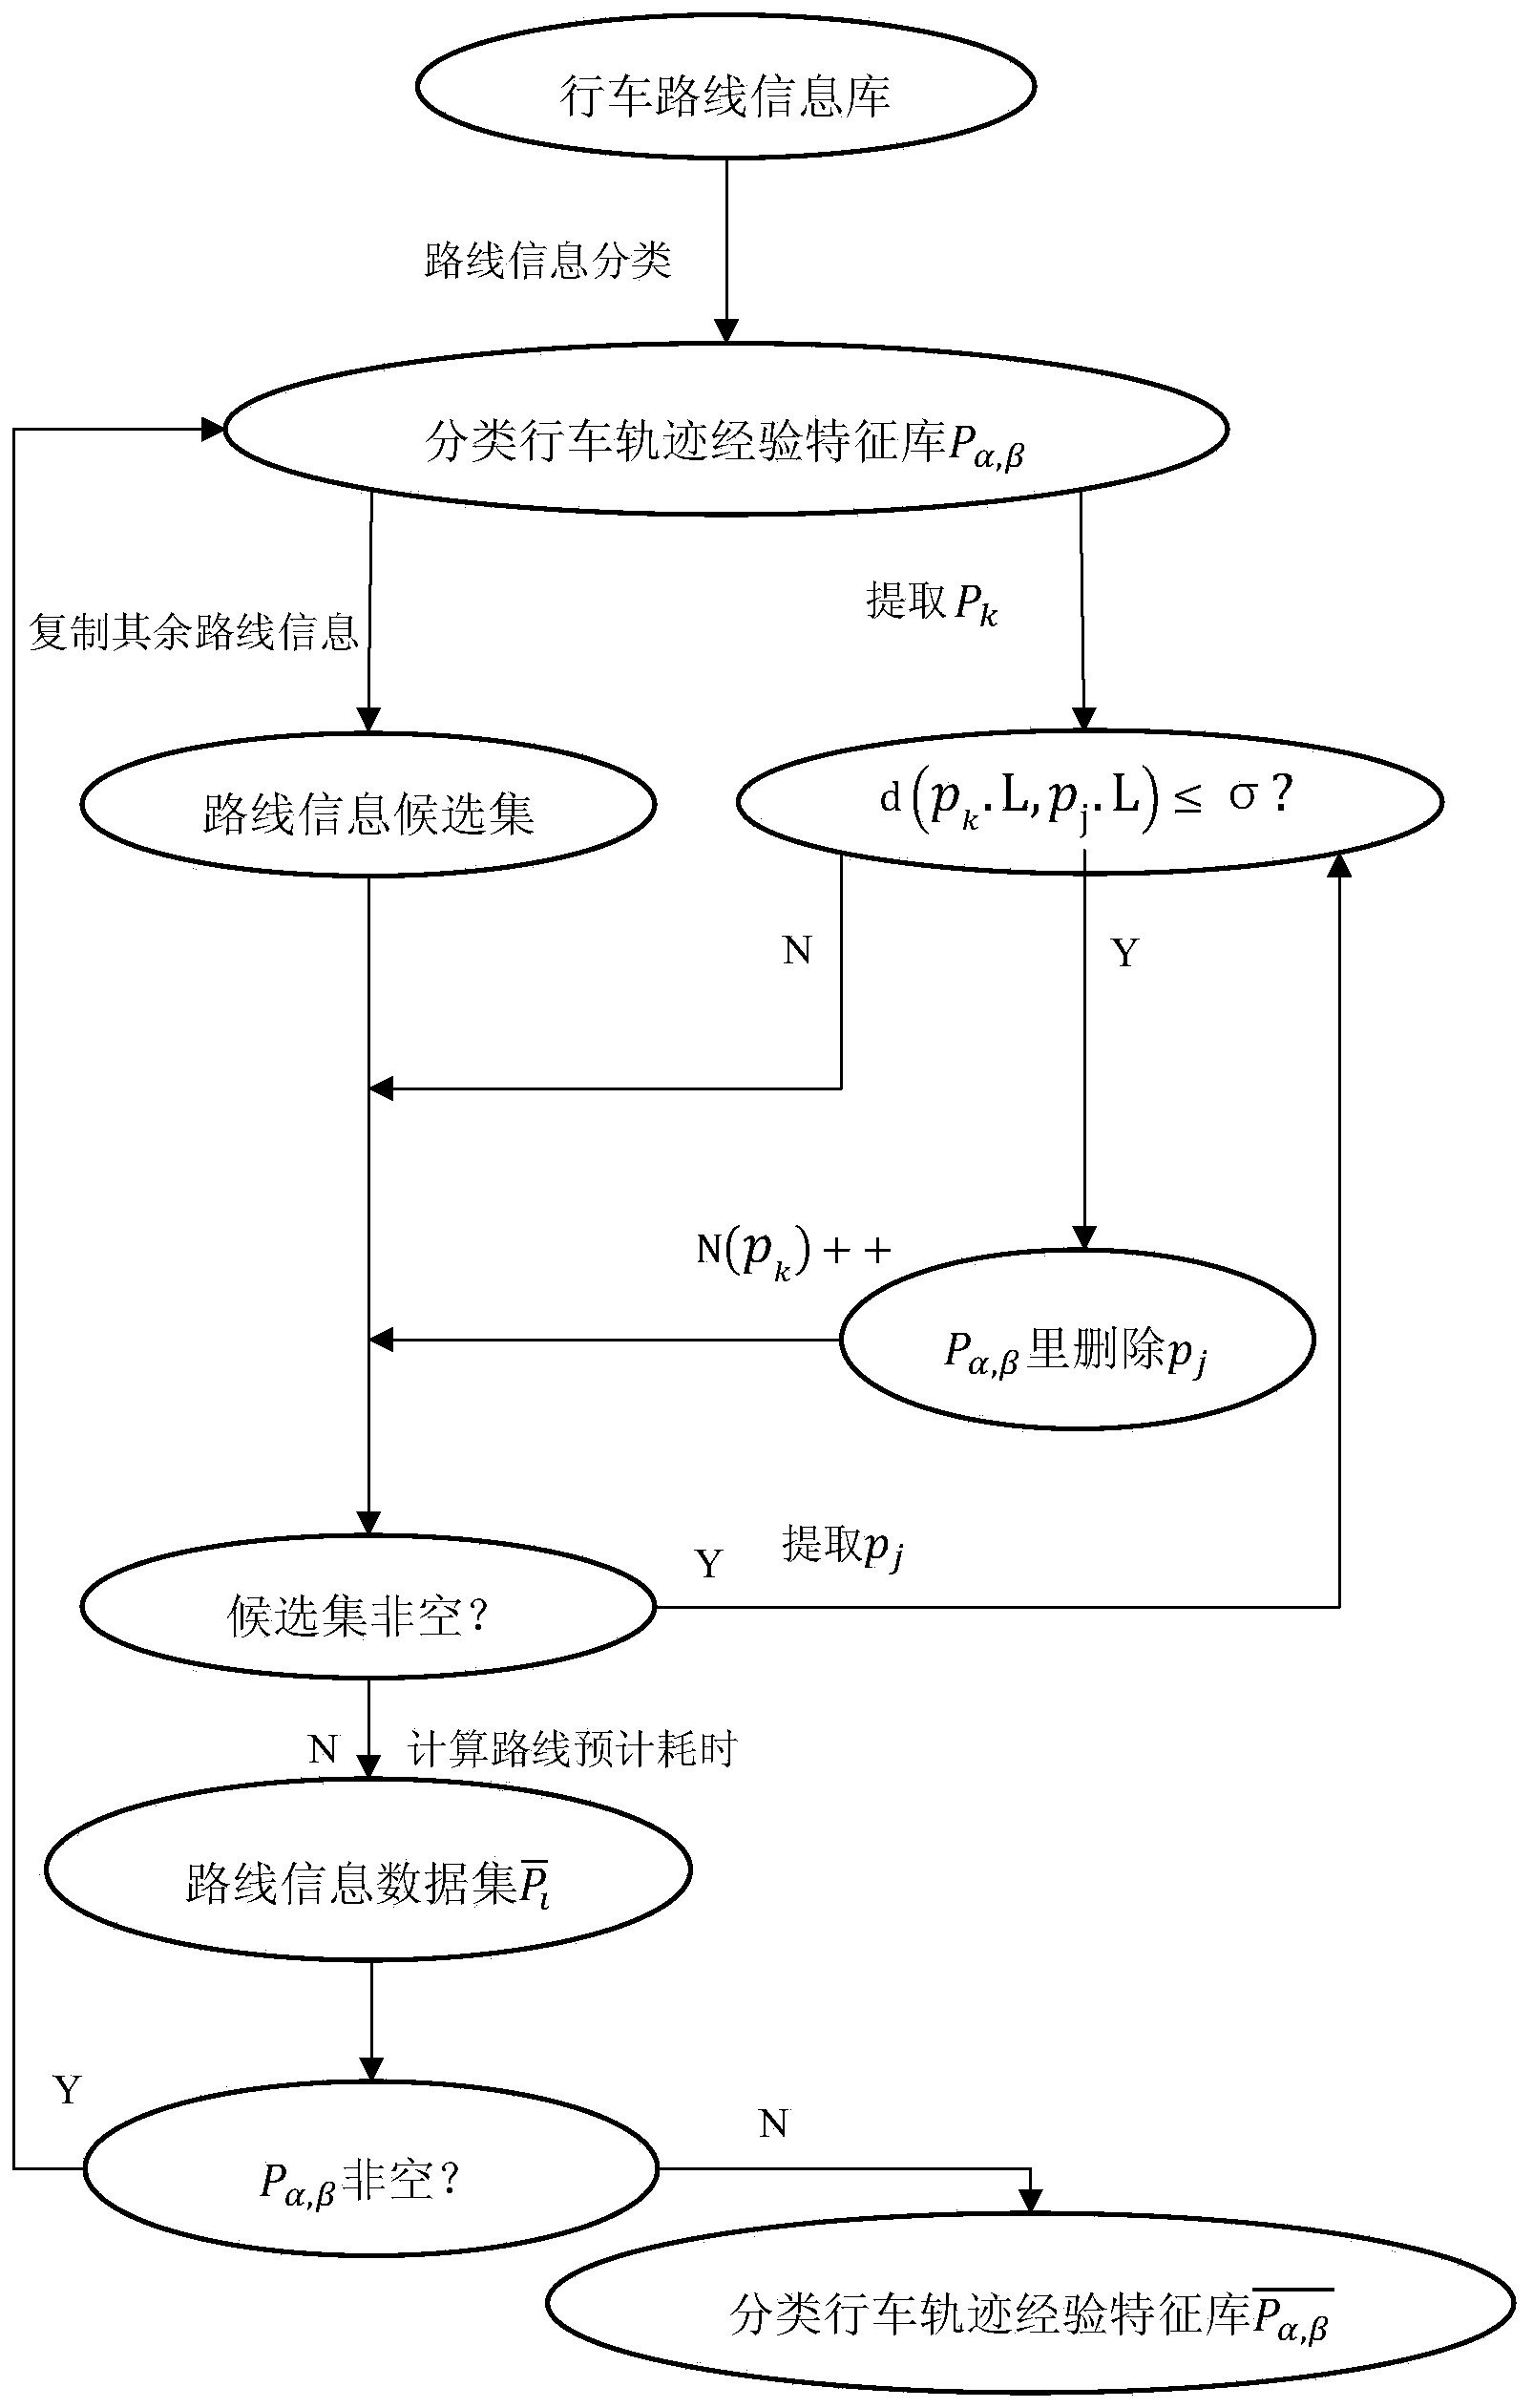 Extraction method of taxi driving track experience knowledge paths